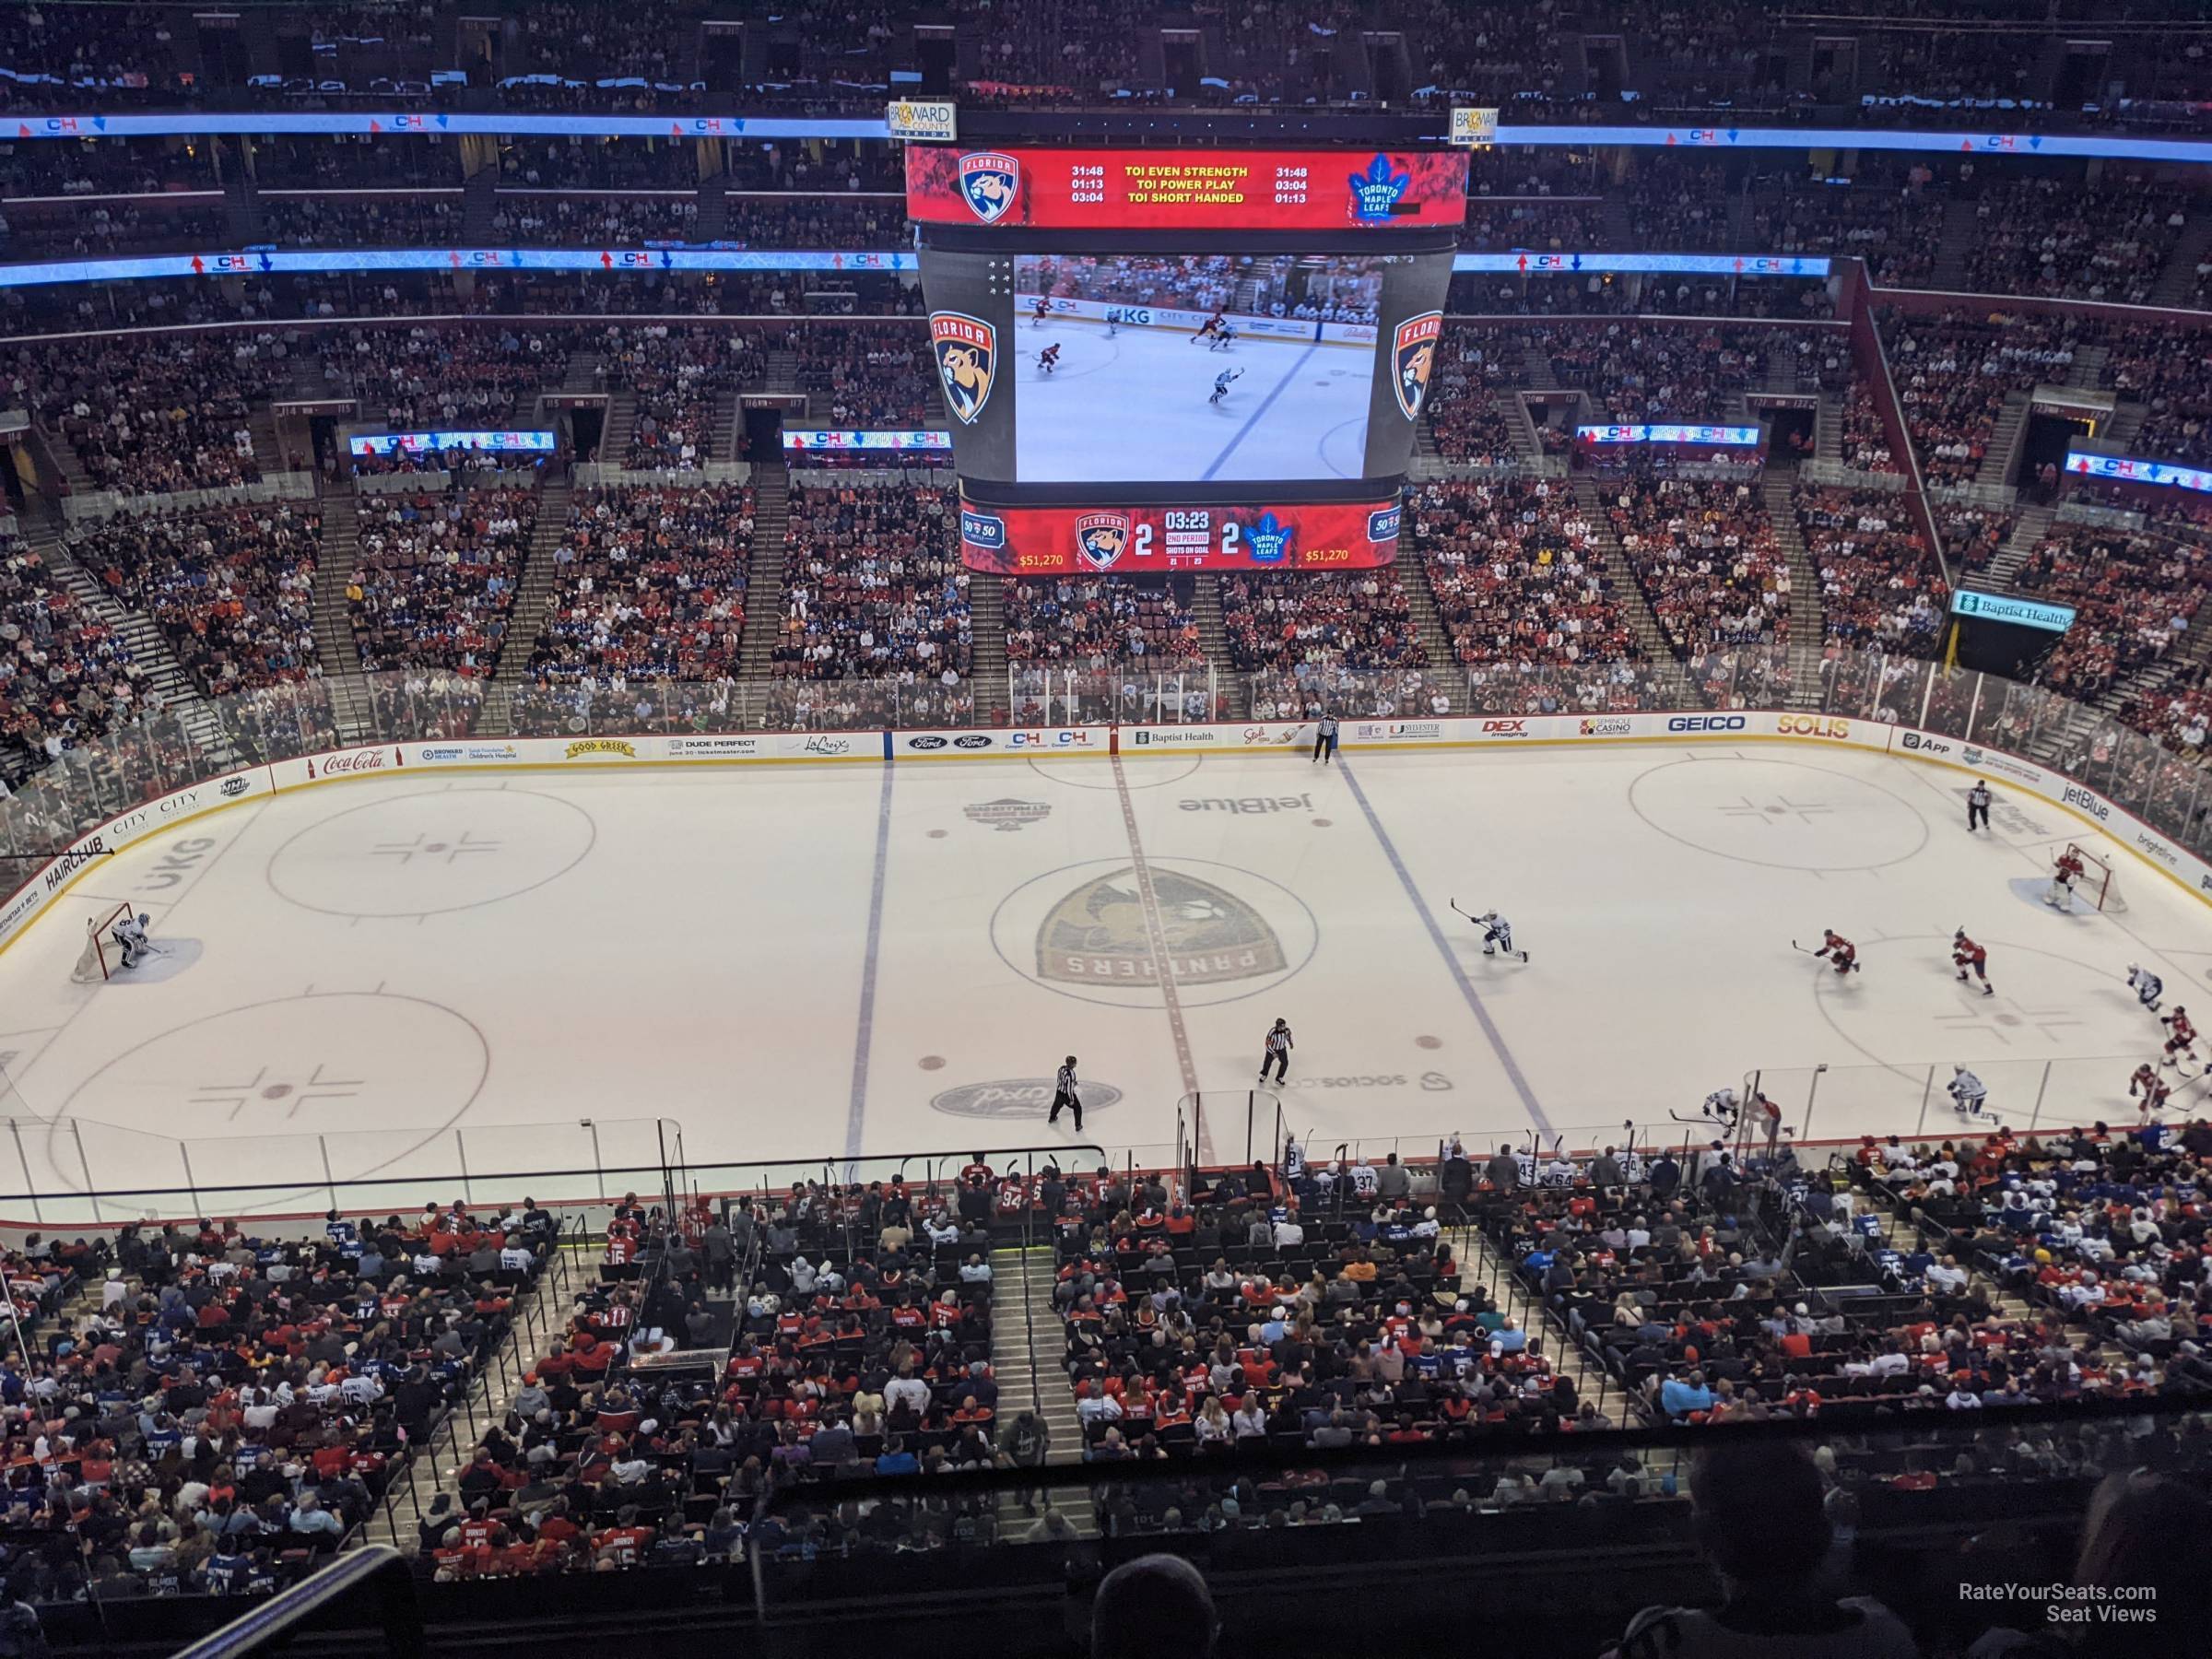 section 301, row 3 seat view  for hockey - fla live arena